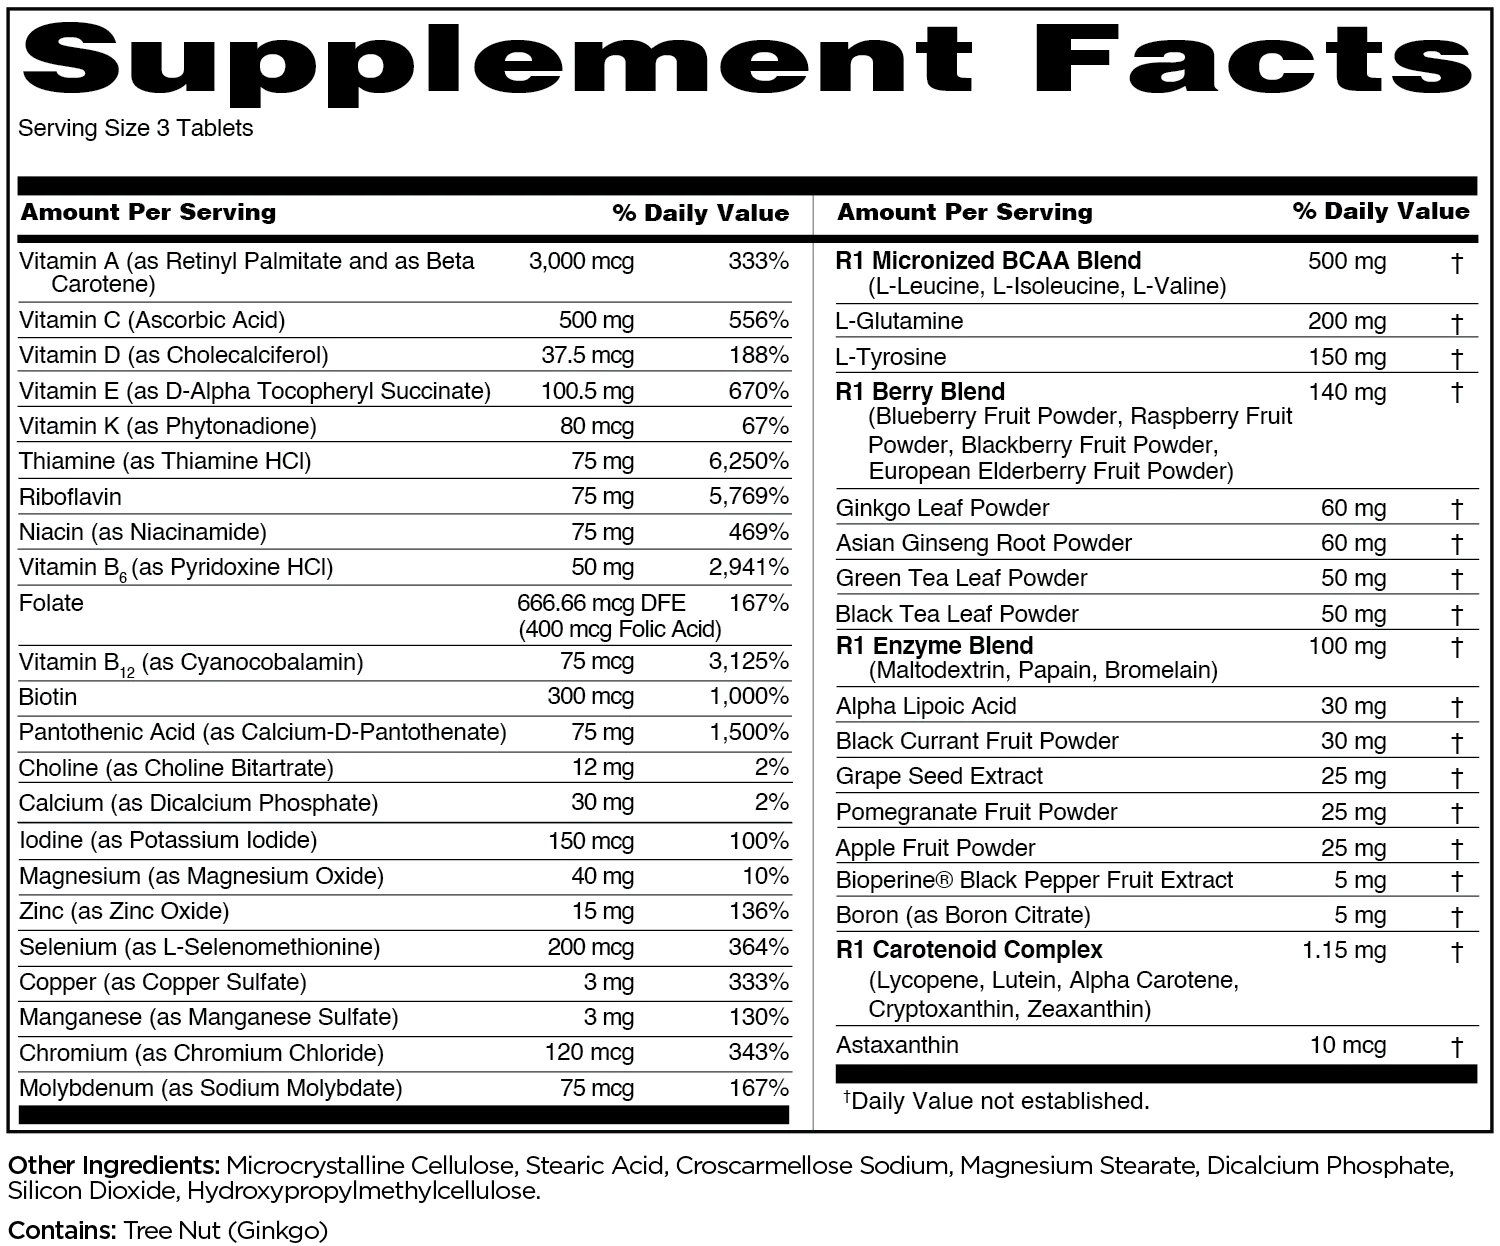 Supplement facts label showing serving size, daily value percentages, and ingredients of a multivitamin, including various vitamins, calcium, magnesium, and more.